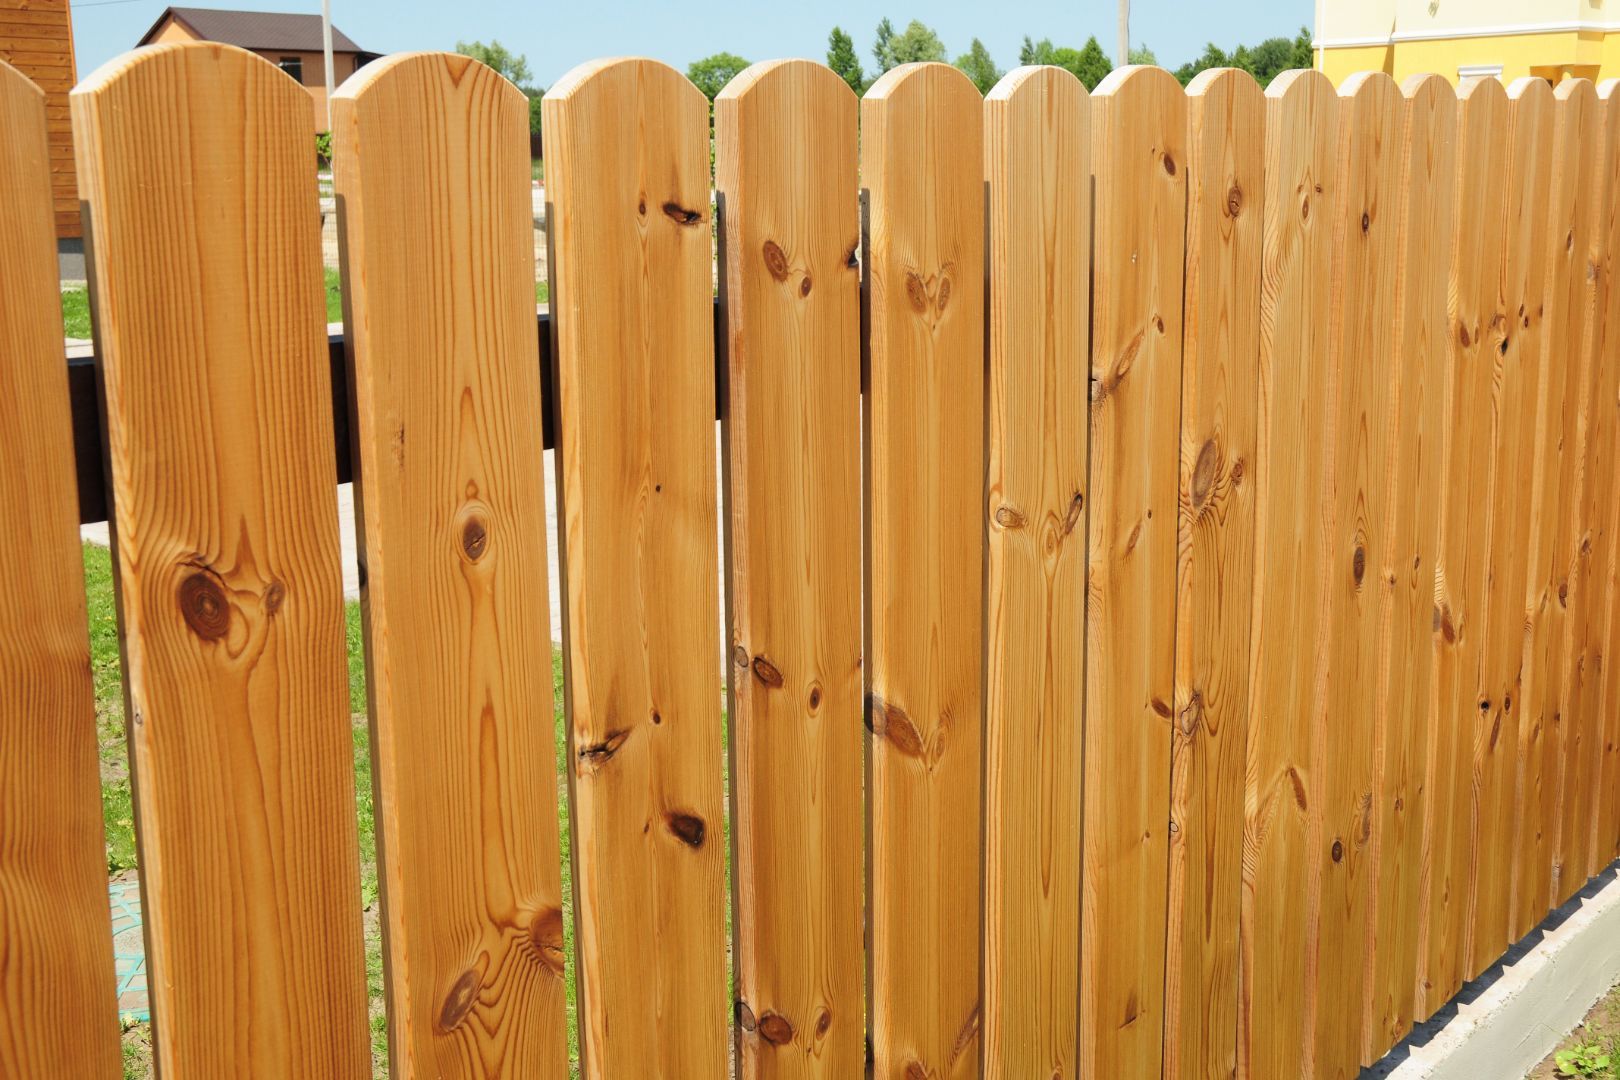 An image of a wood fence in a residential area in Morrisville, NC